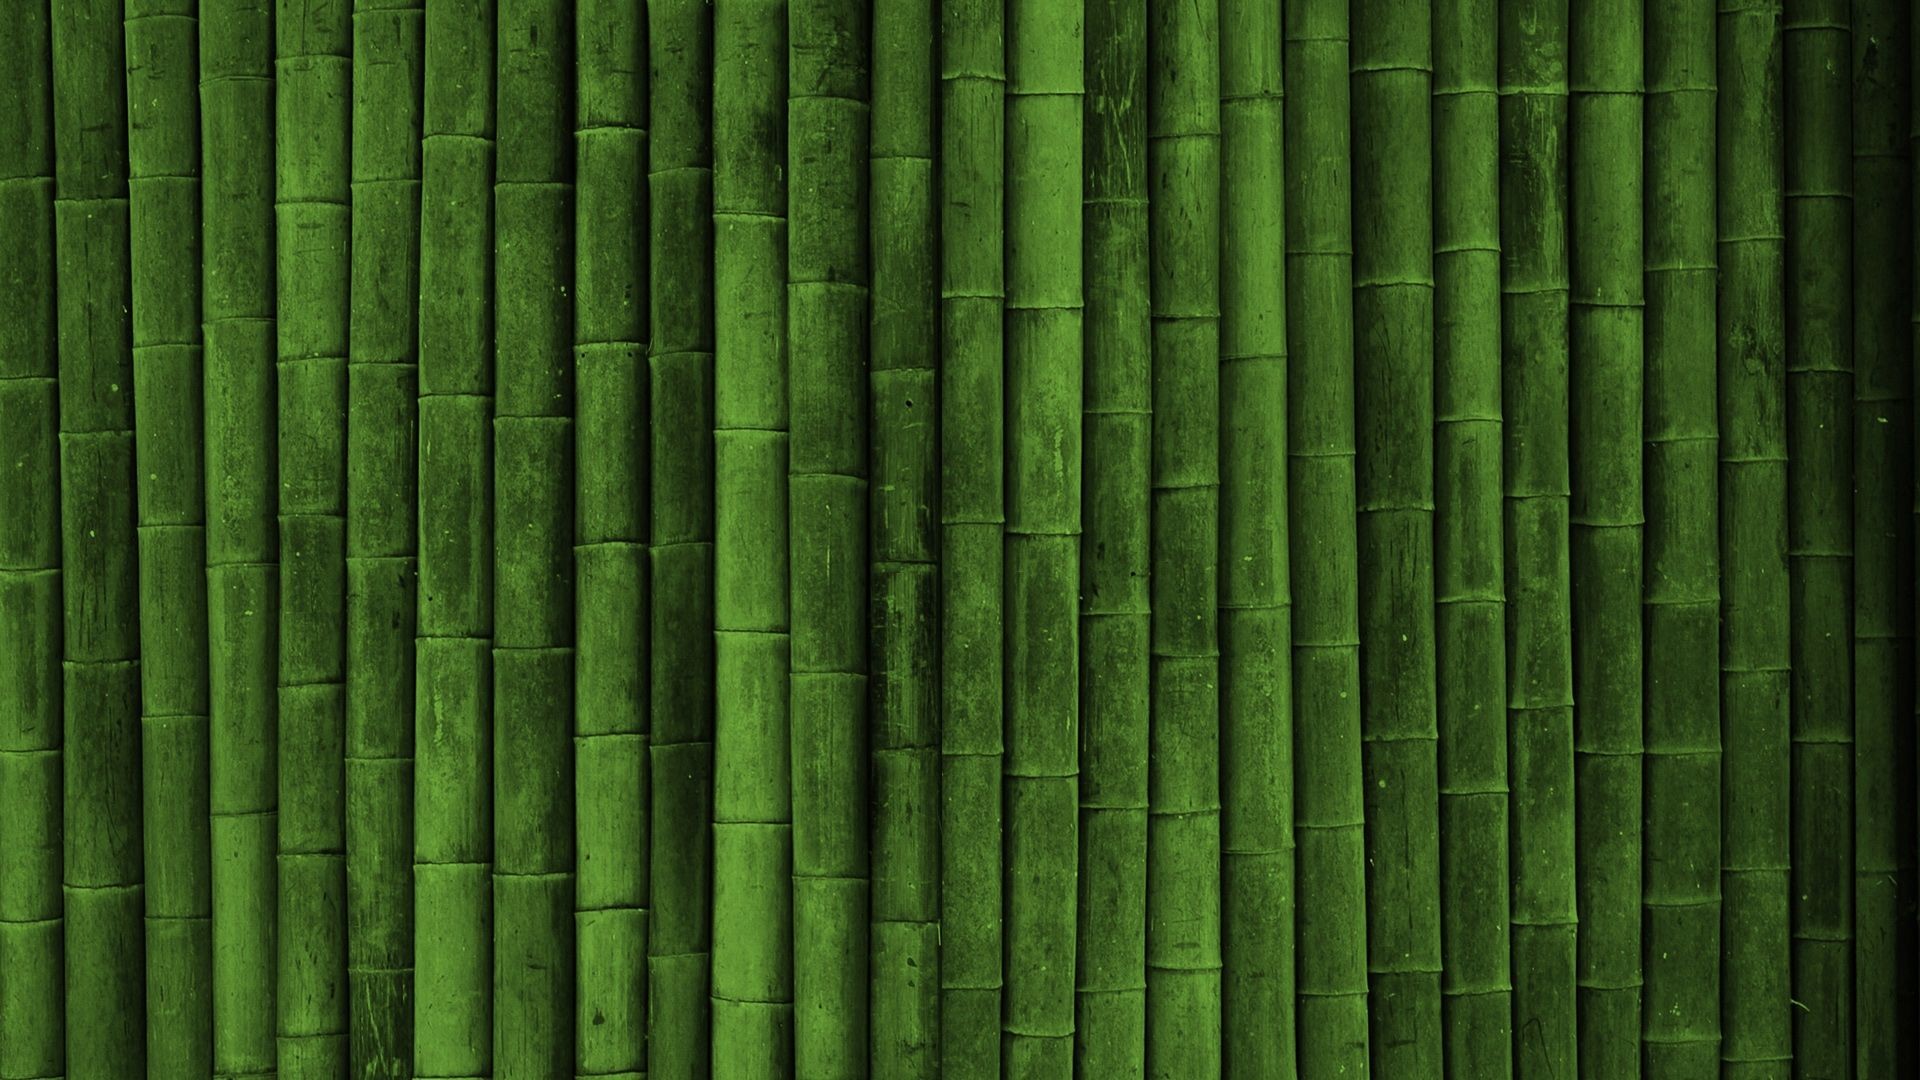 Wallpaper Green HD with image resolution 1920x1080 pixel. You can make this wallpaper for your Desktop Computer Backgrounds, Mac Wallpapers, Android Lock screen or iPhone Screensavers